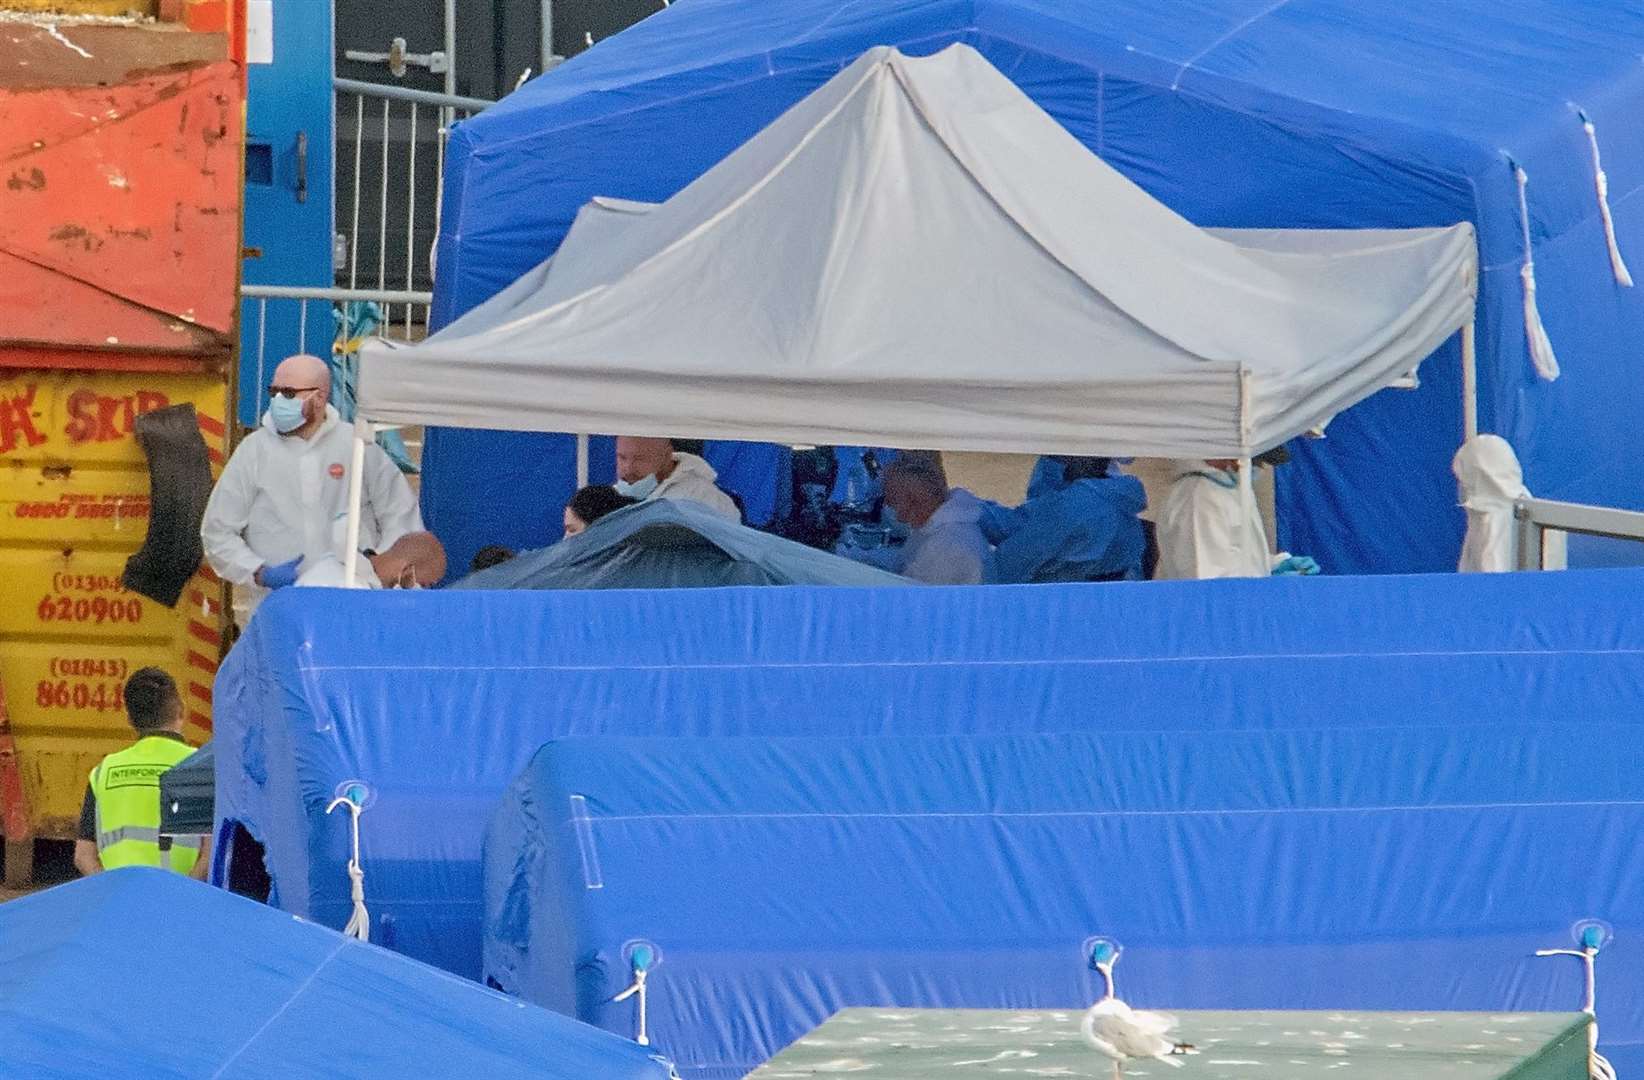 Staff were seen wearing protective biohazard suits and face masks. Credit: Stuart Brock